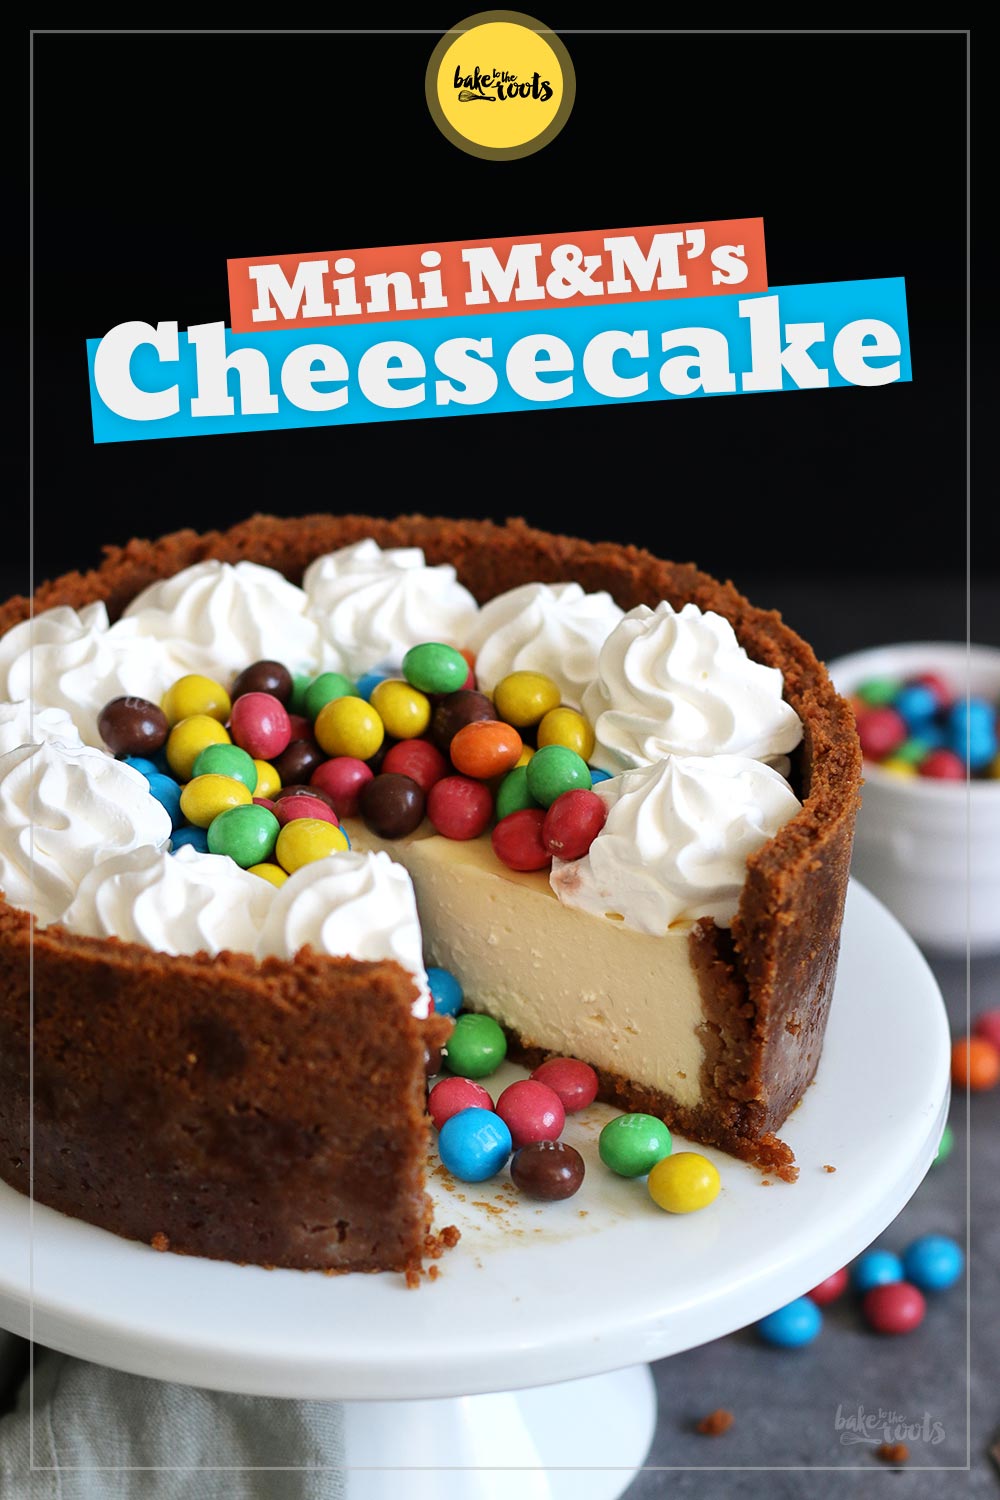 Mini Cheesecake mit M&M's | Bake to the roots